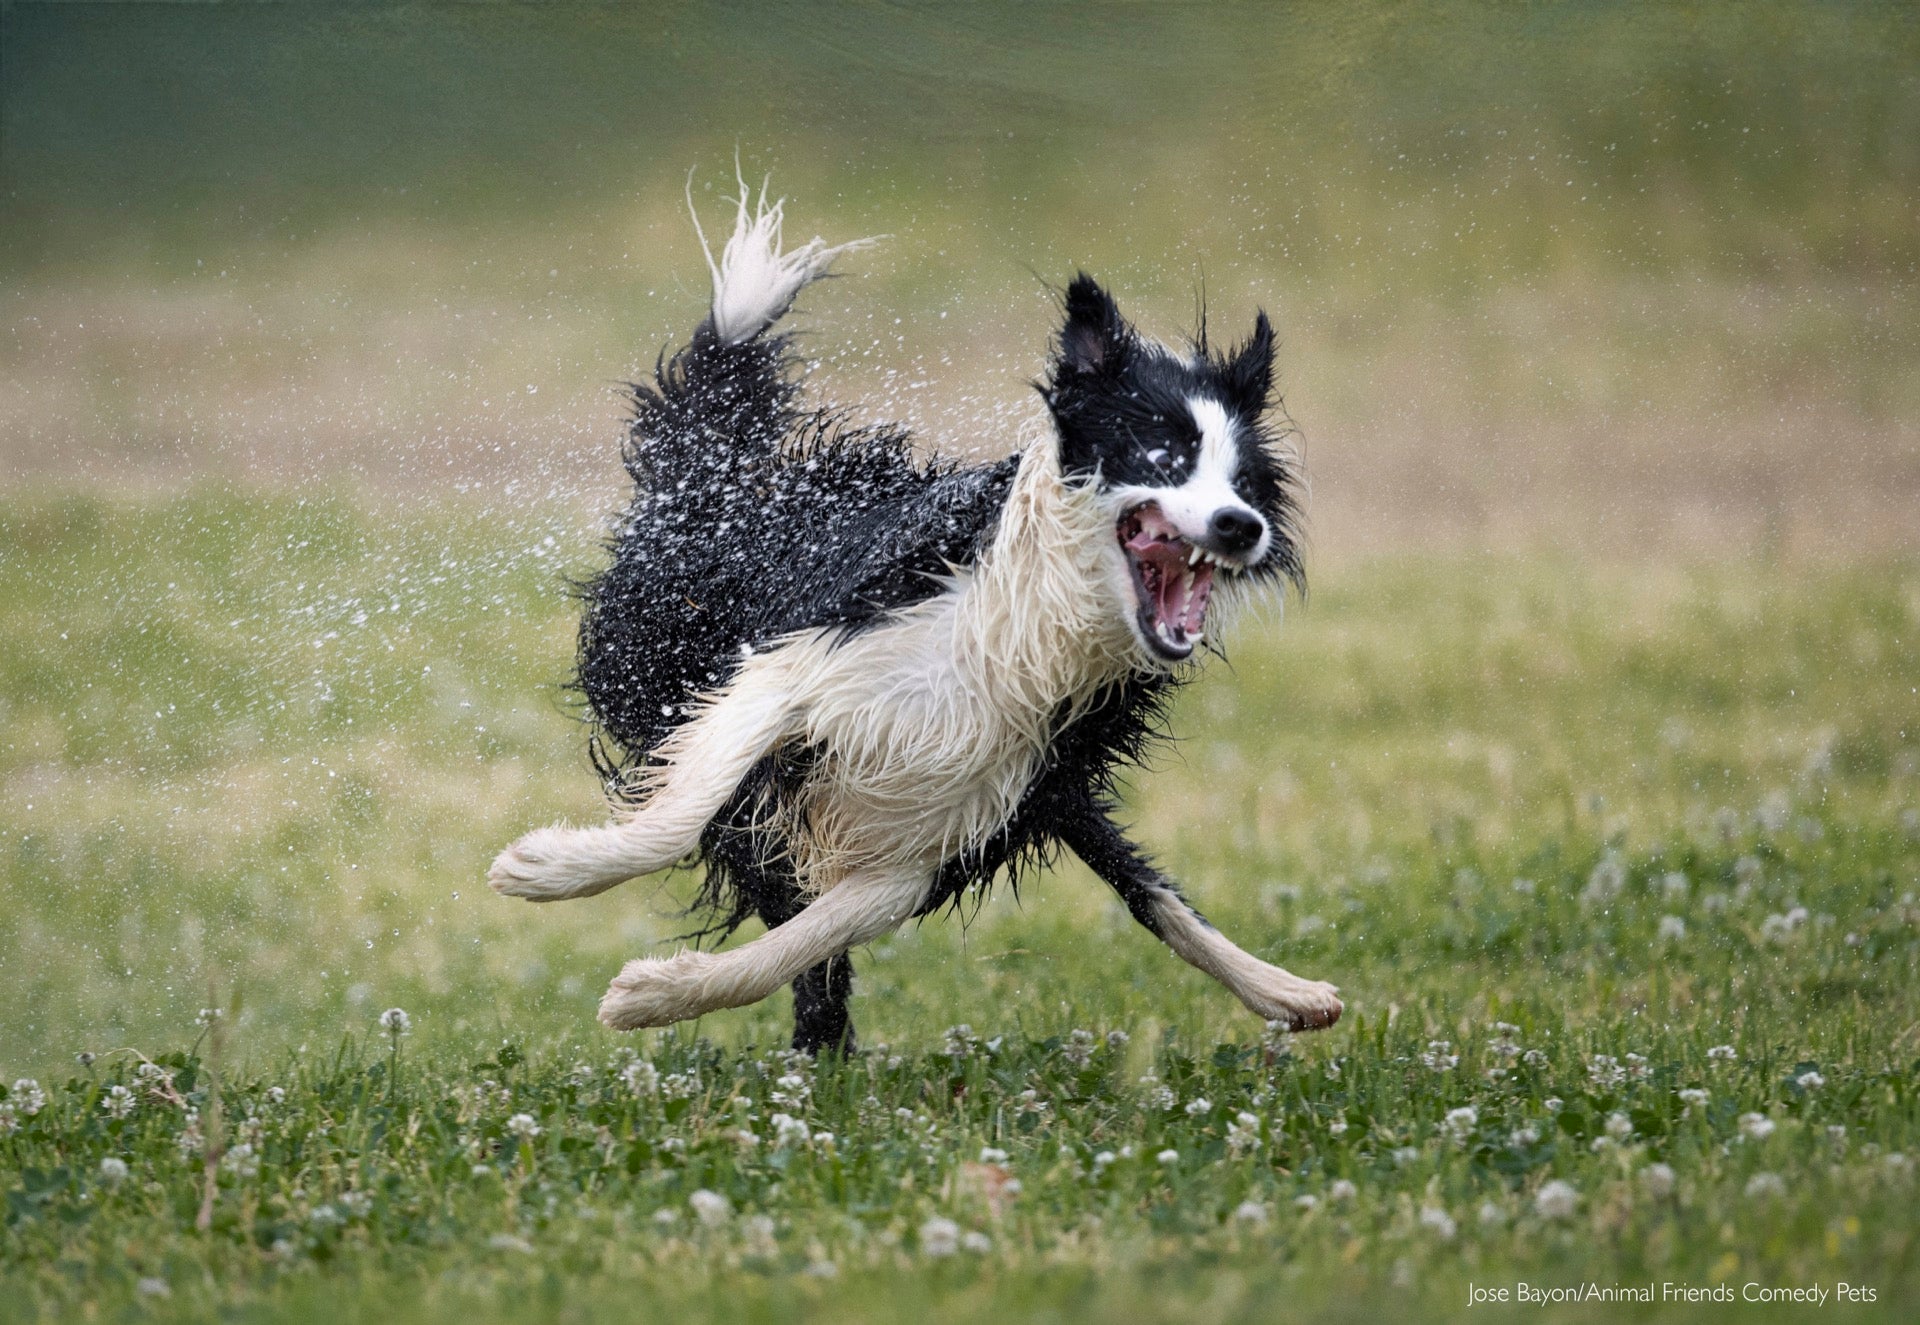 Comedy photo of wet dog